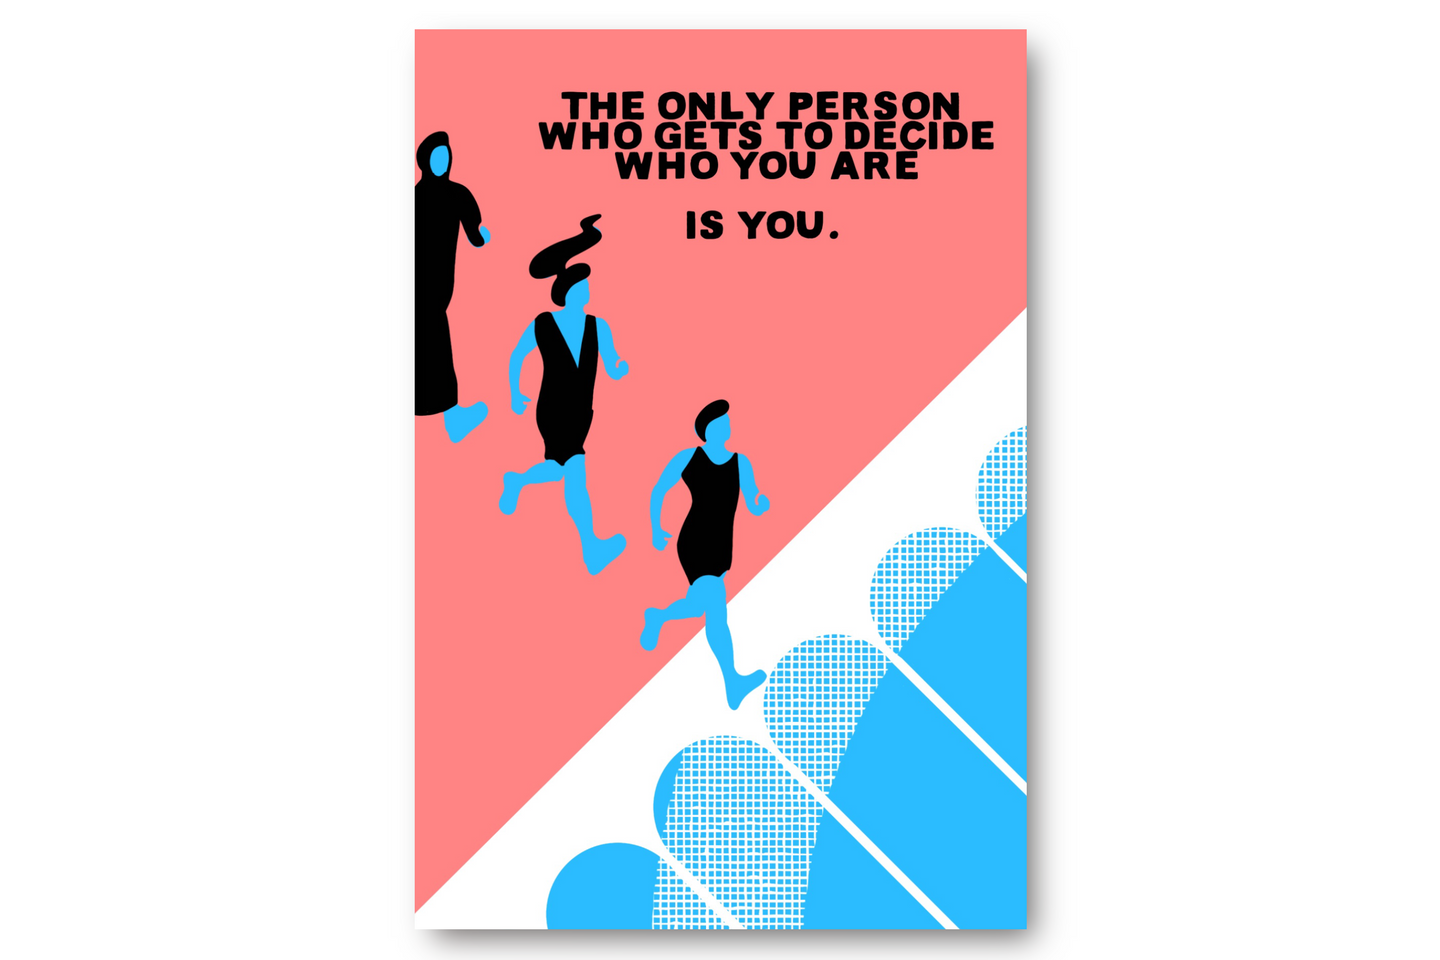 Encouraging Be Yourself Postcards for Postcrossing by MN John - The Only Person who Gets to Decide who you Are is You